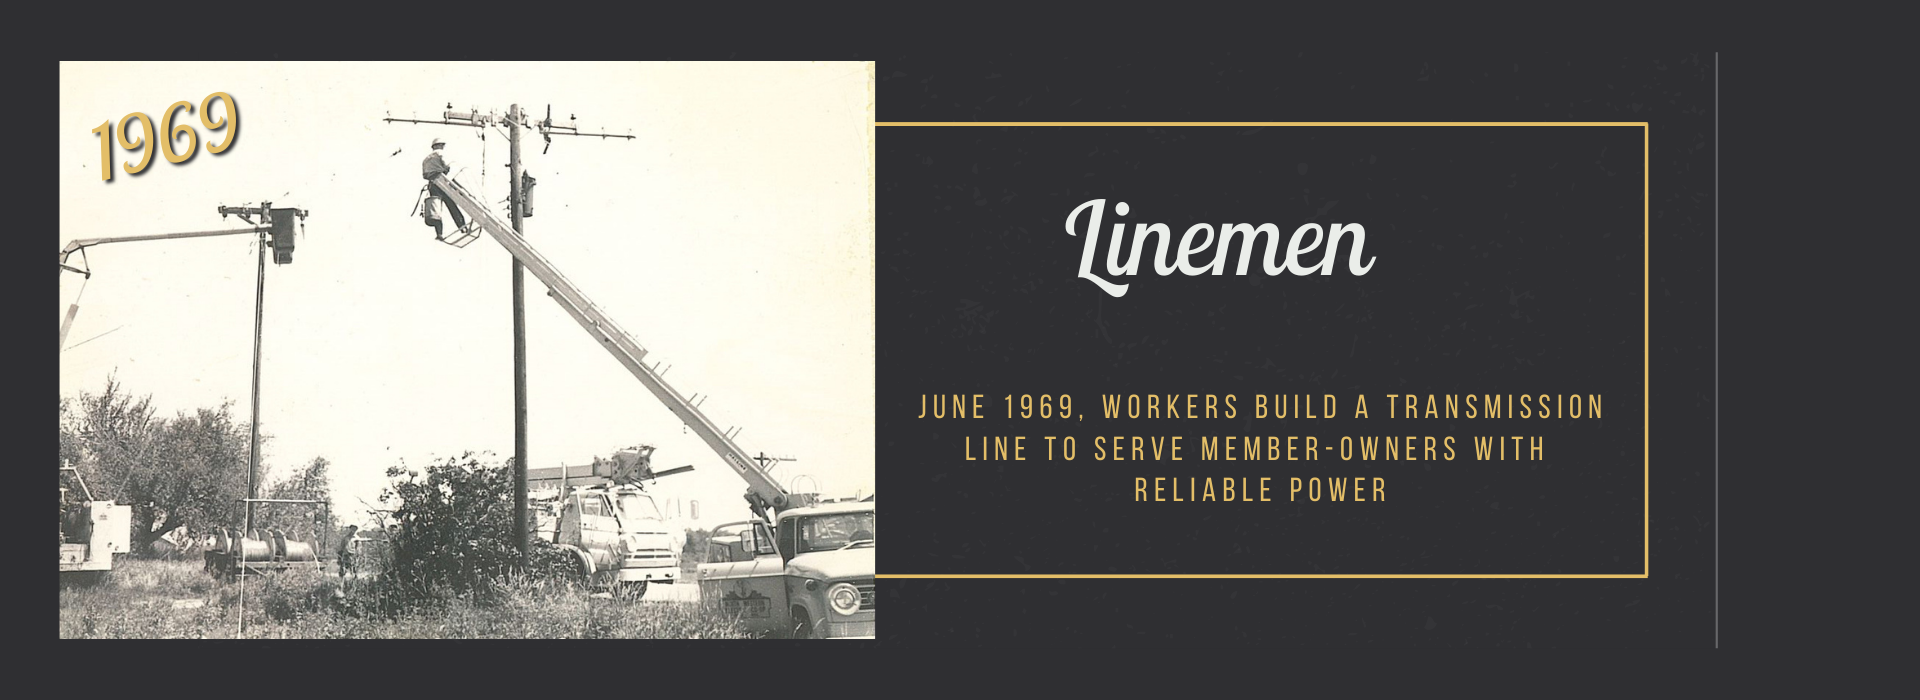 June 1969, workers build a transmission line to serve member-owners with  reliable power